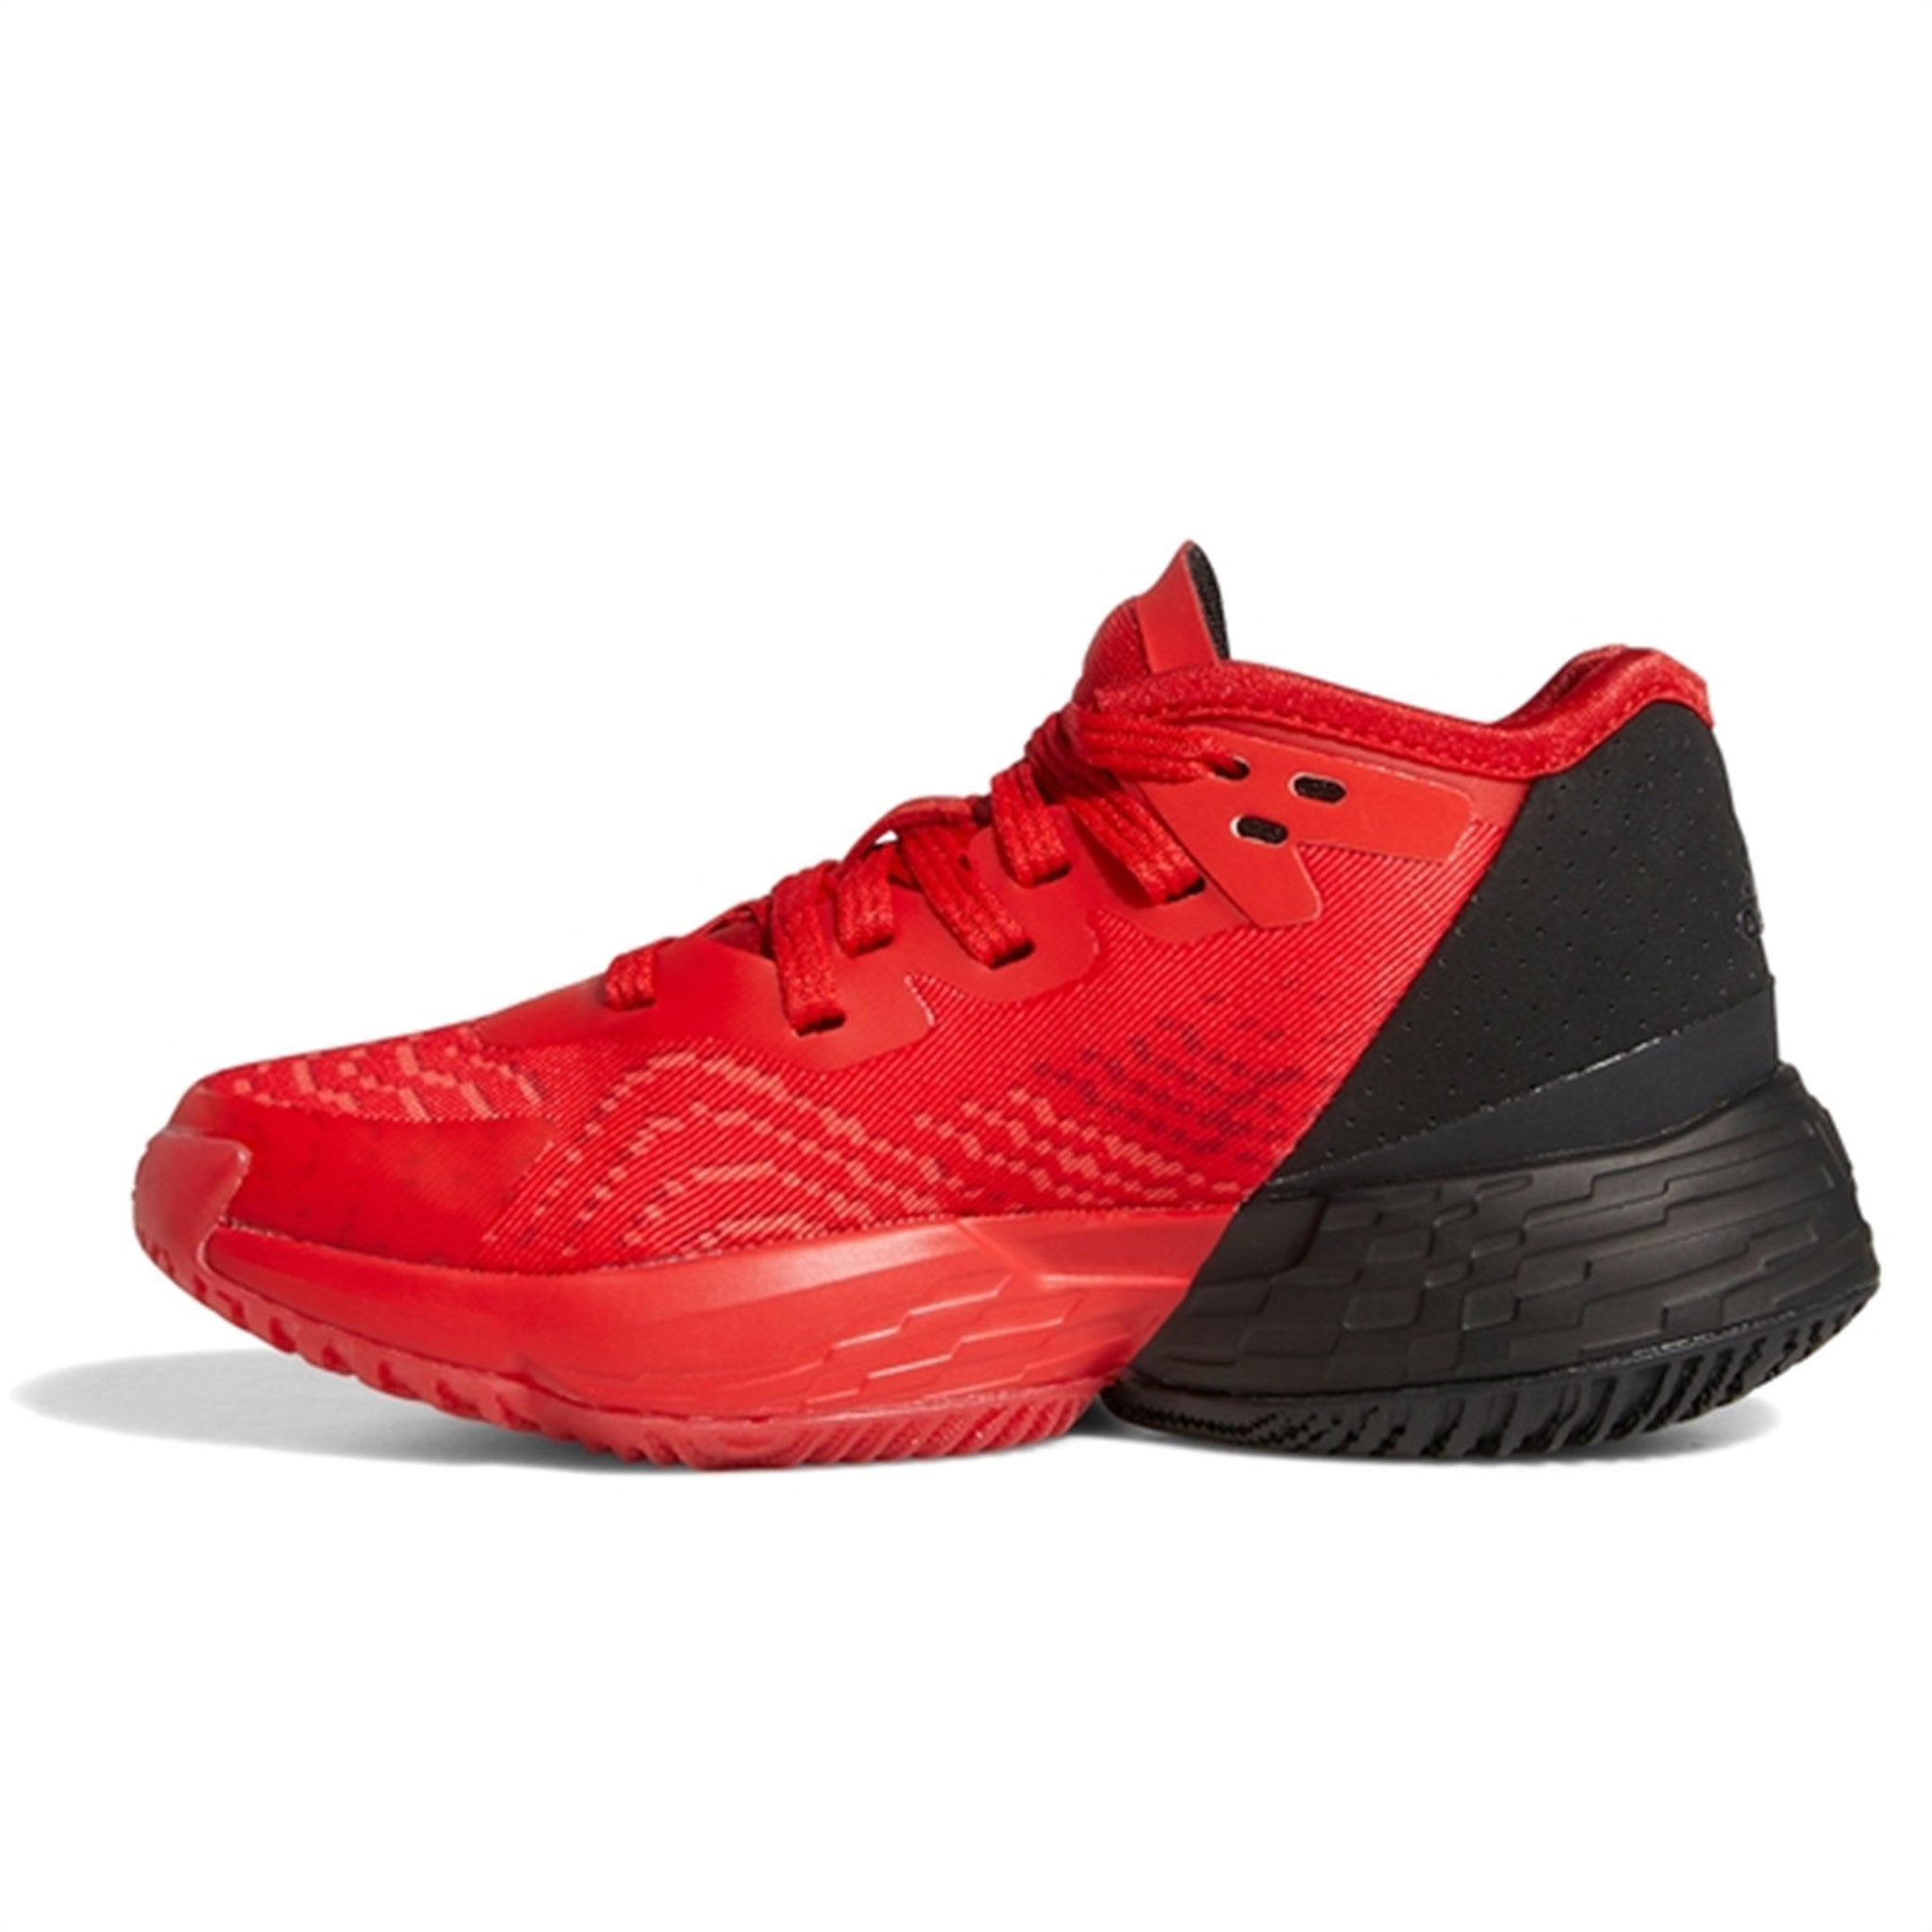 adidas D.O.N. Issue Sneakers Vivid Red 4